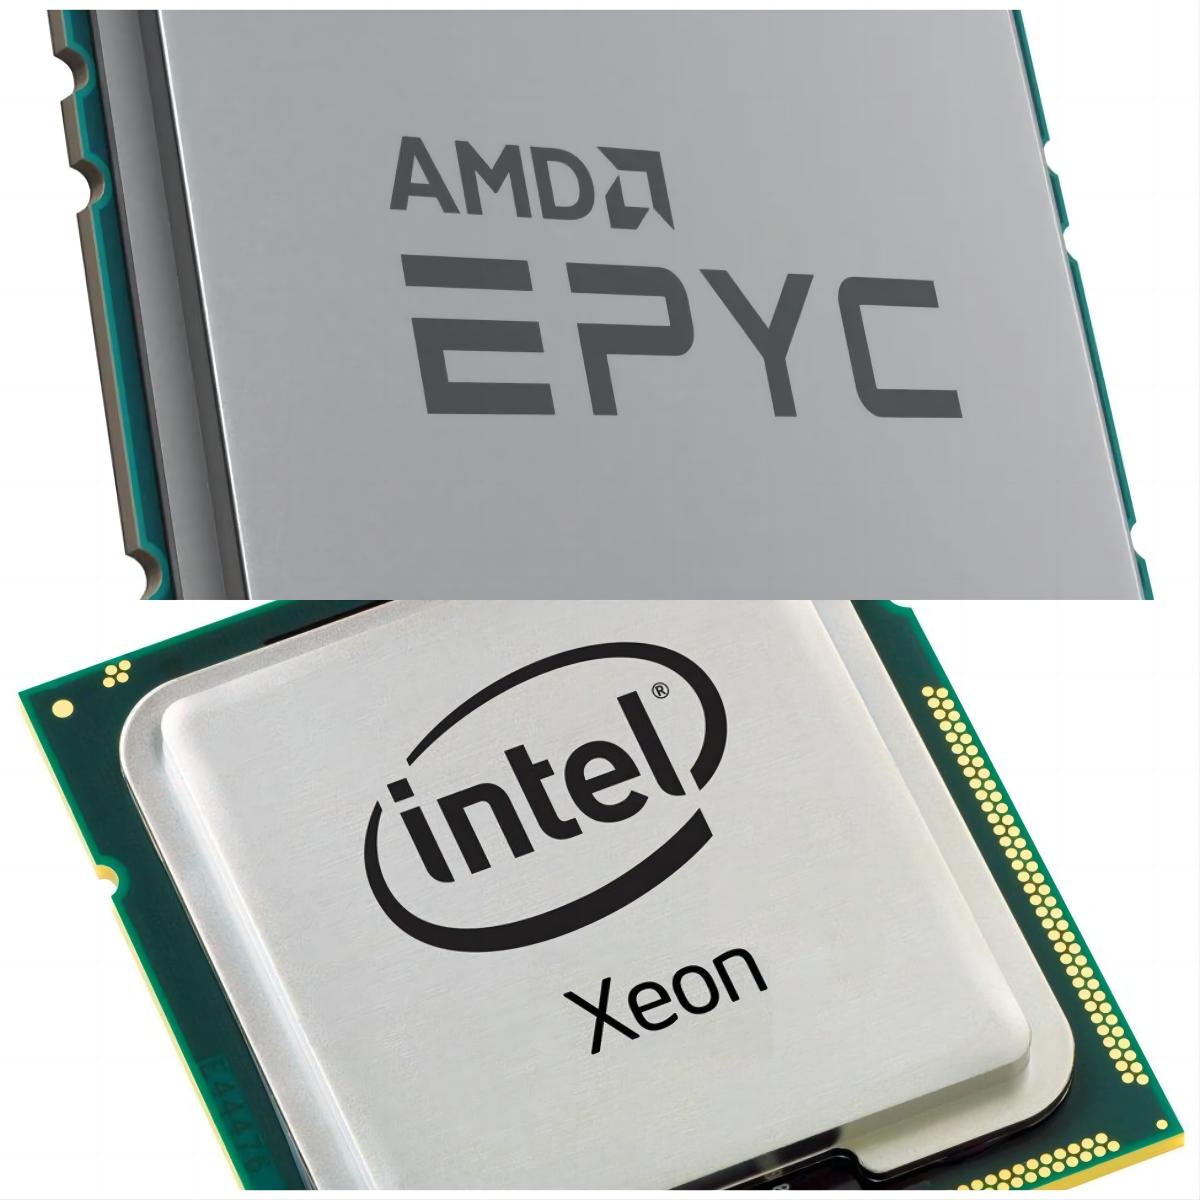 AMD EPYC vs Intel Xeon: Which is Right for You?